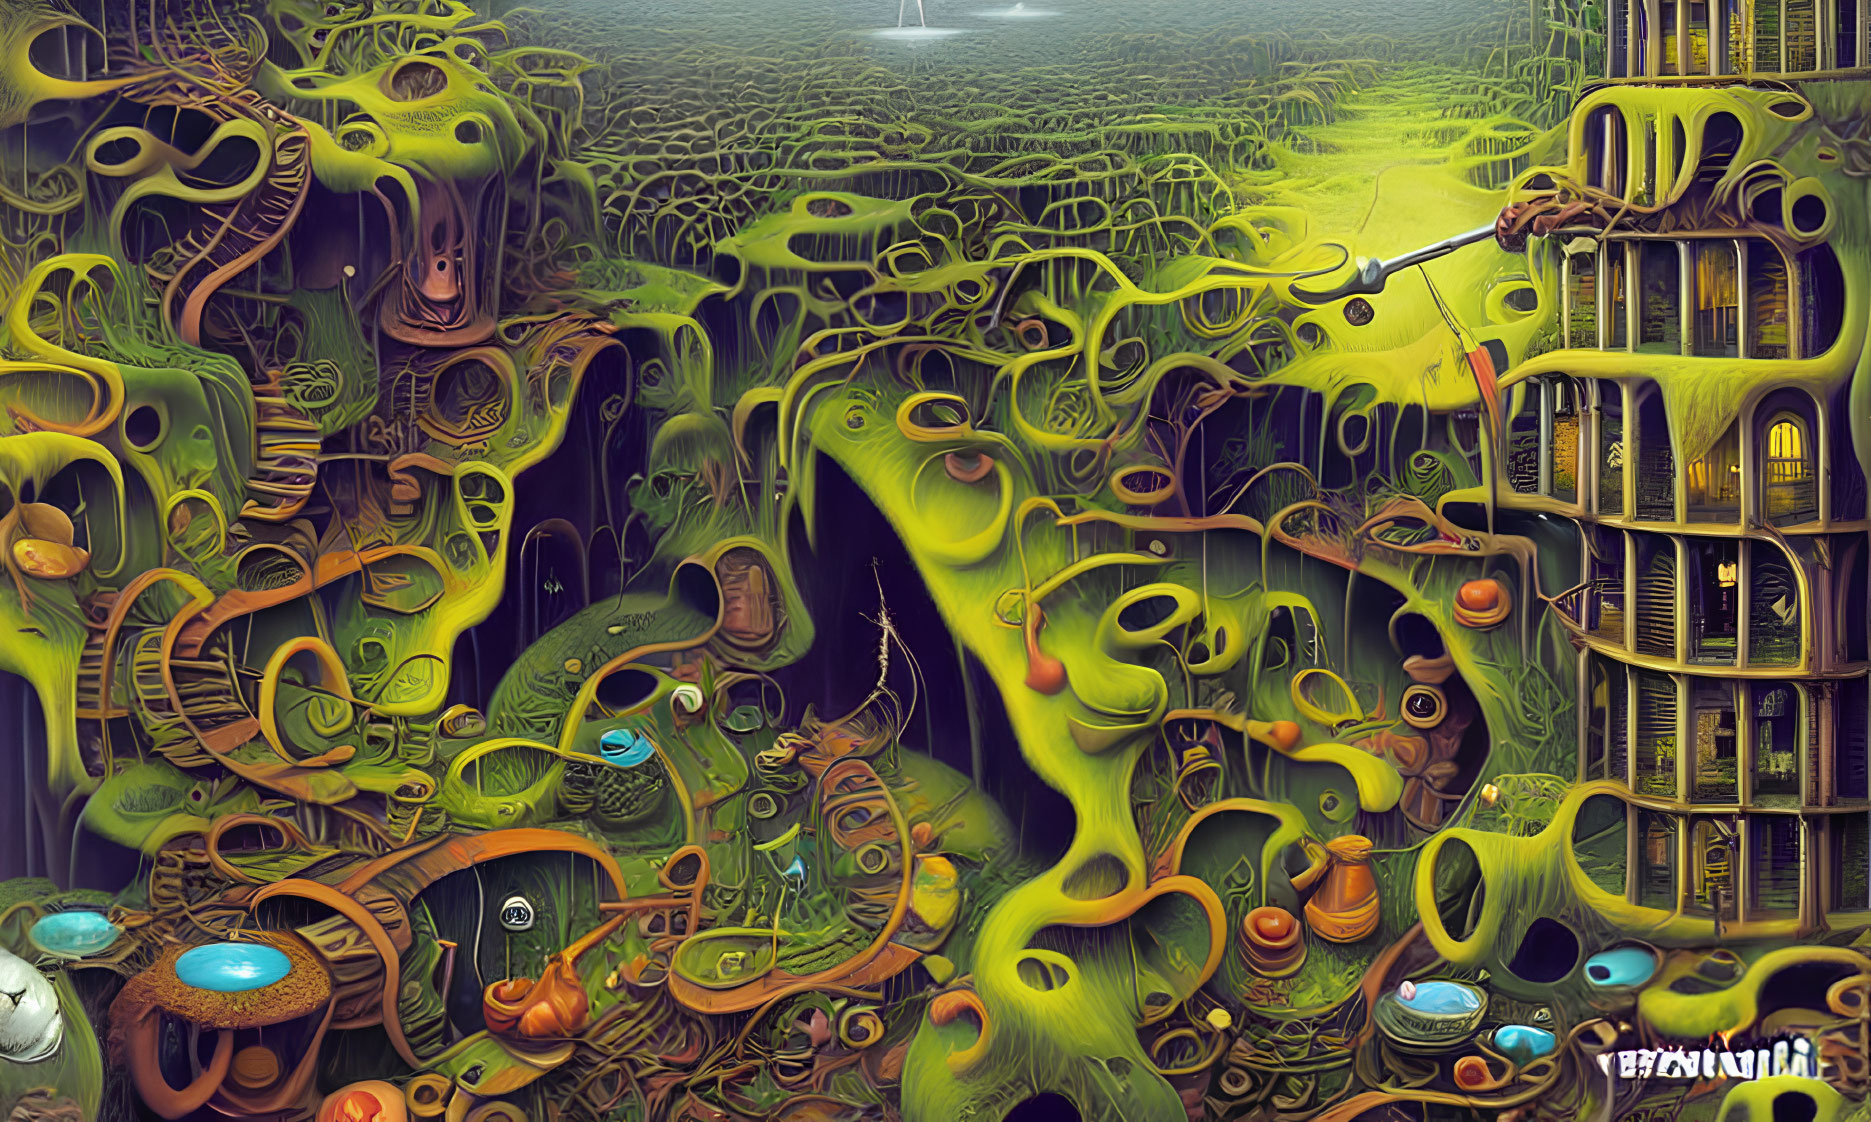 Vibrant Green and Yellow Psychedelic Landscape with Surreal Elements